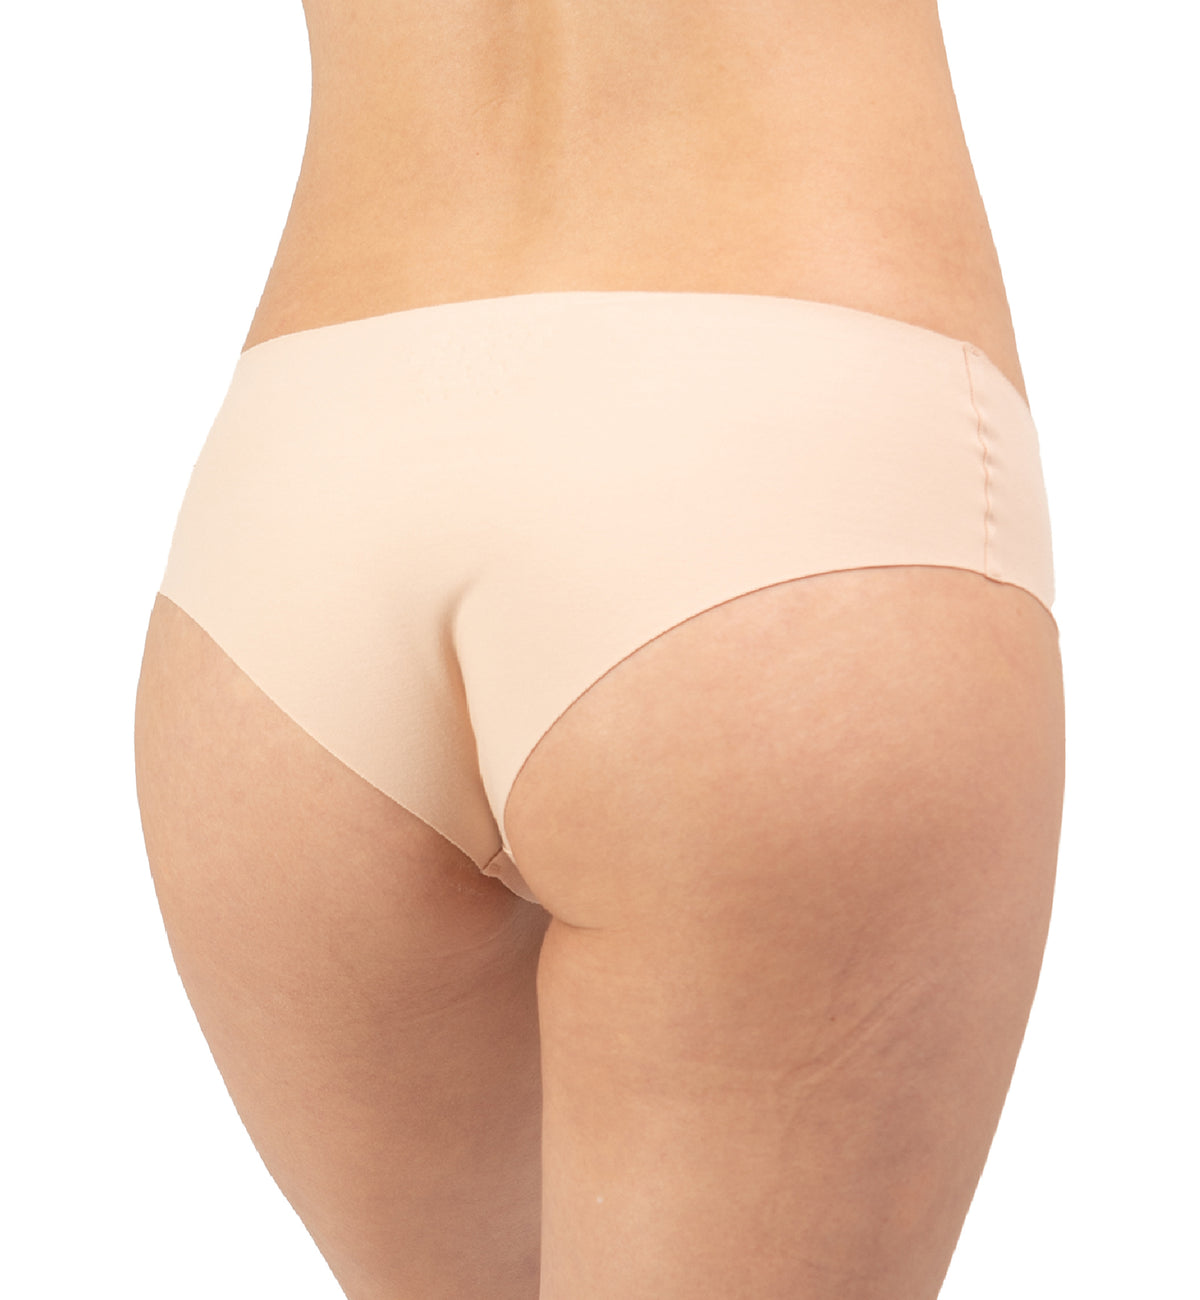 Panty Promise Low Rise Hipster,XS,Pale - Pale,XS